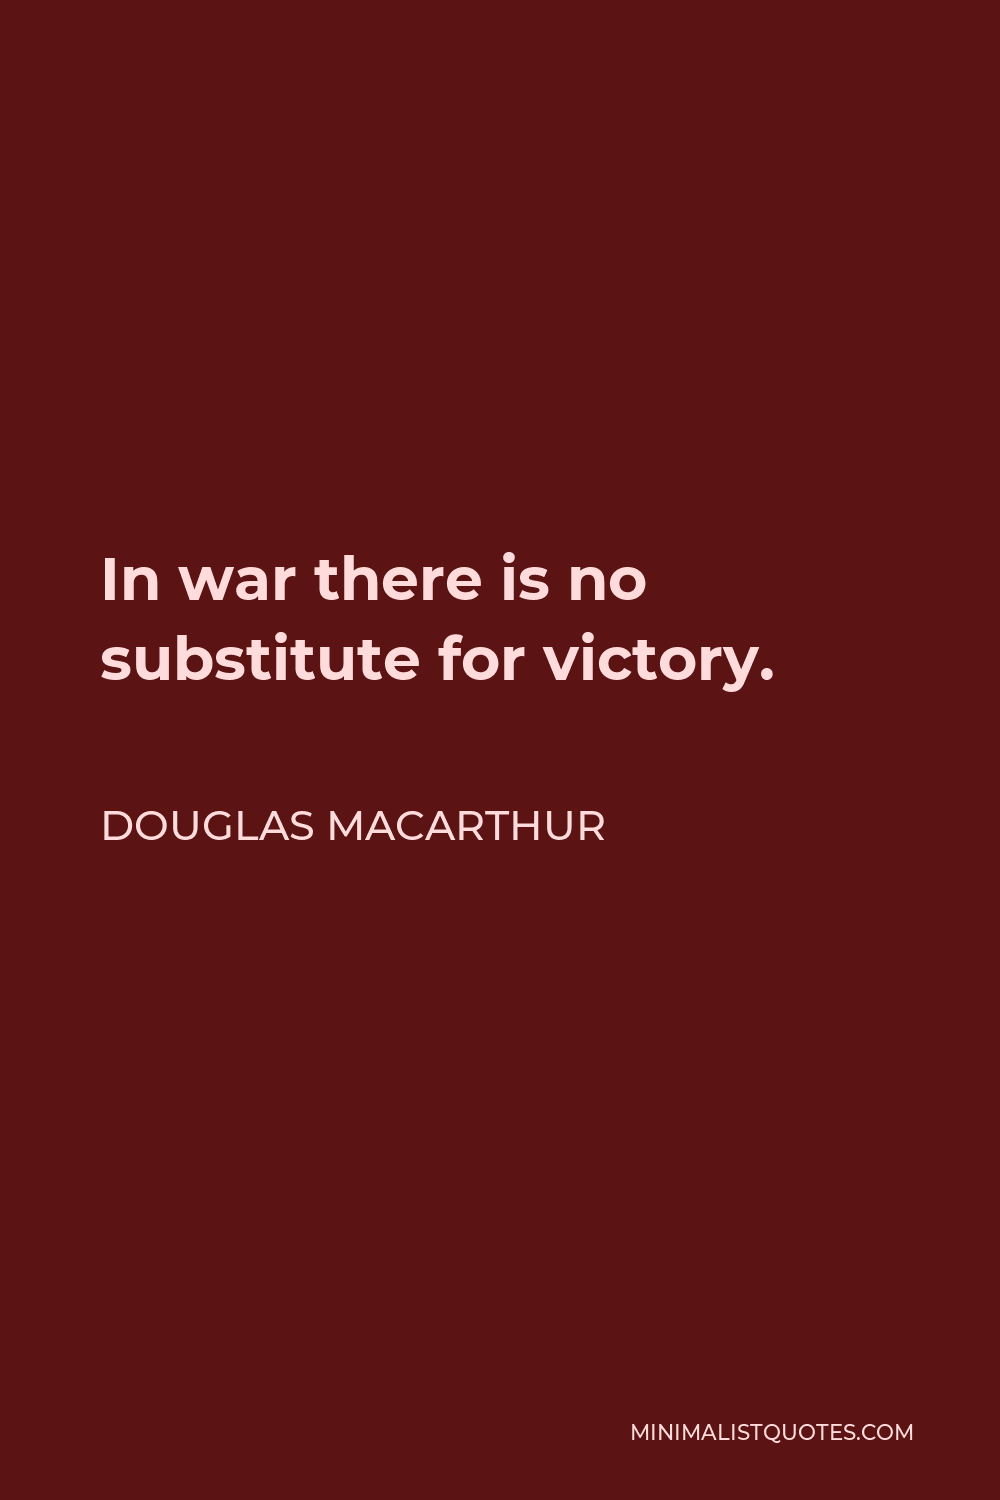 Douglas MacArthur Quote - In war there is no substitute for victory.